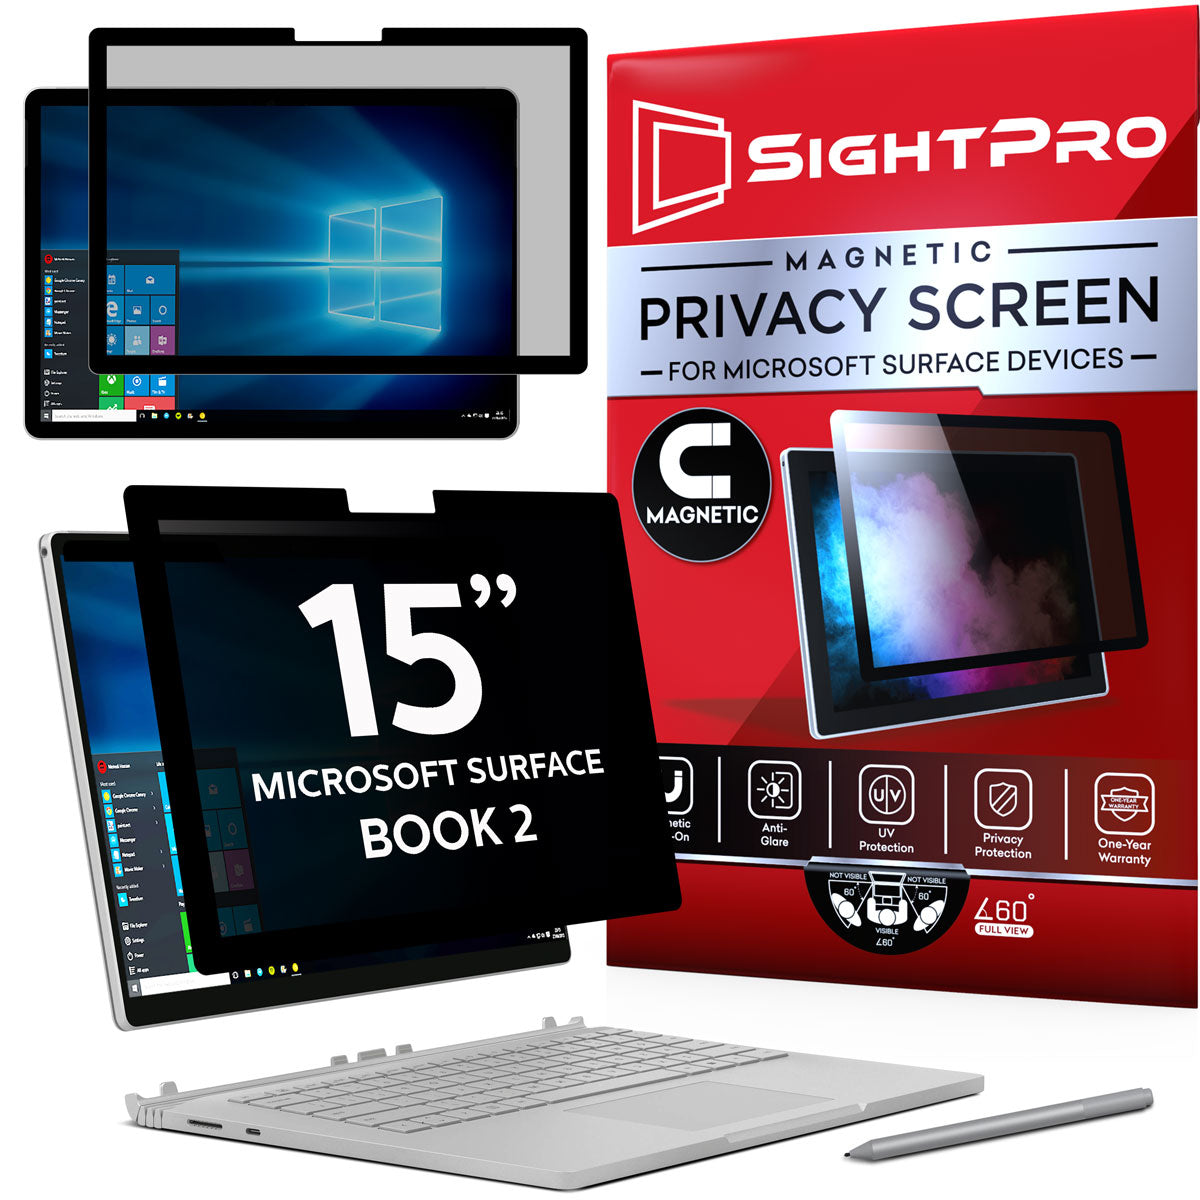 SightPro Magnetic Privacy Screen for Surface Book 2 15"